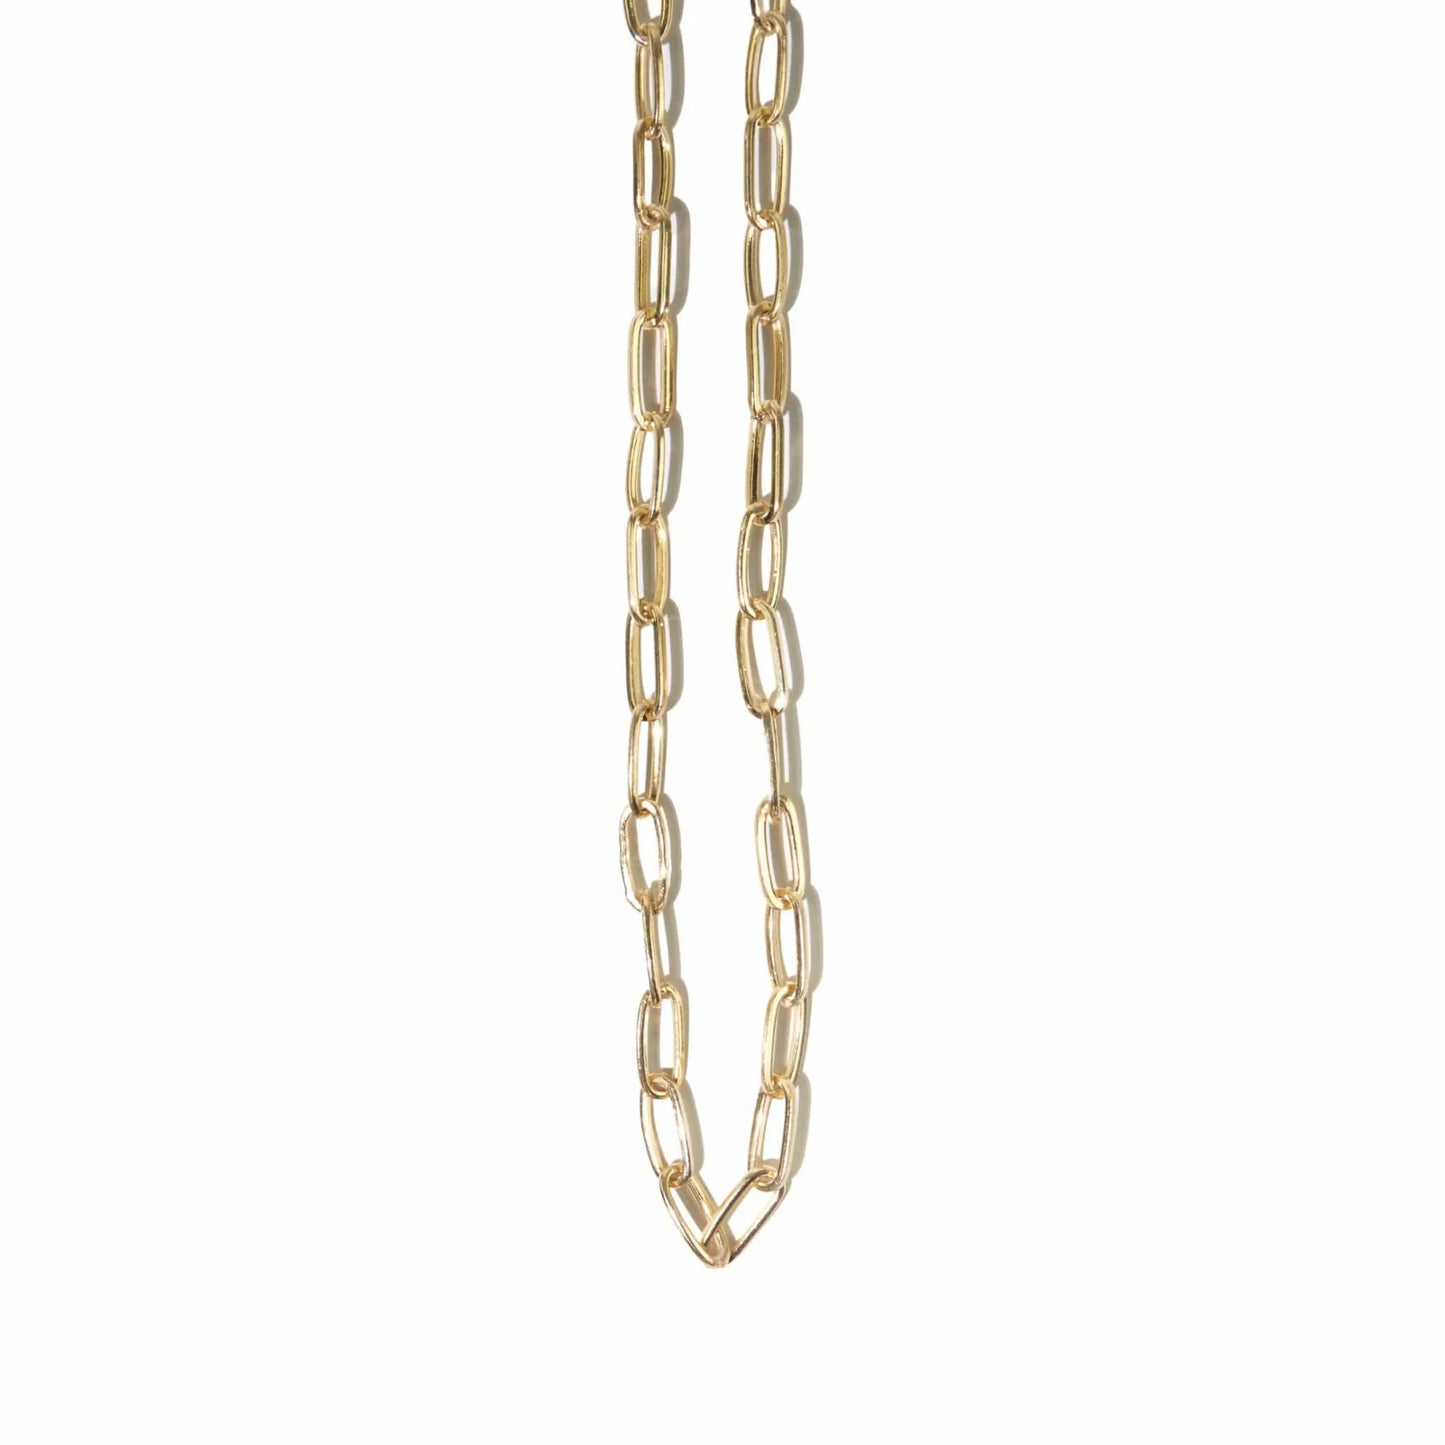 Brass Paperchain Necklace